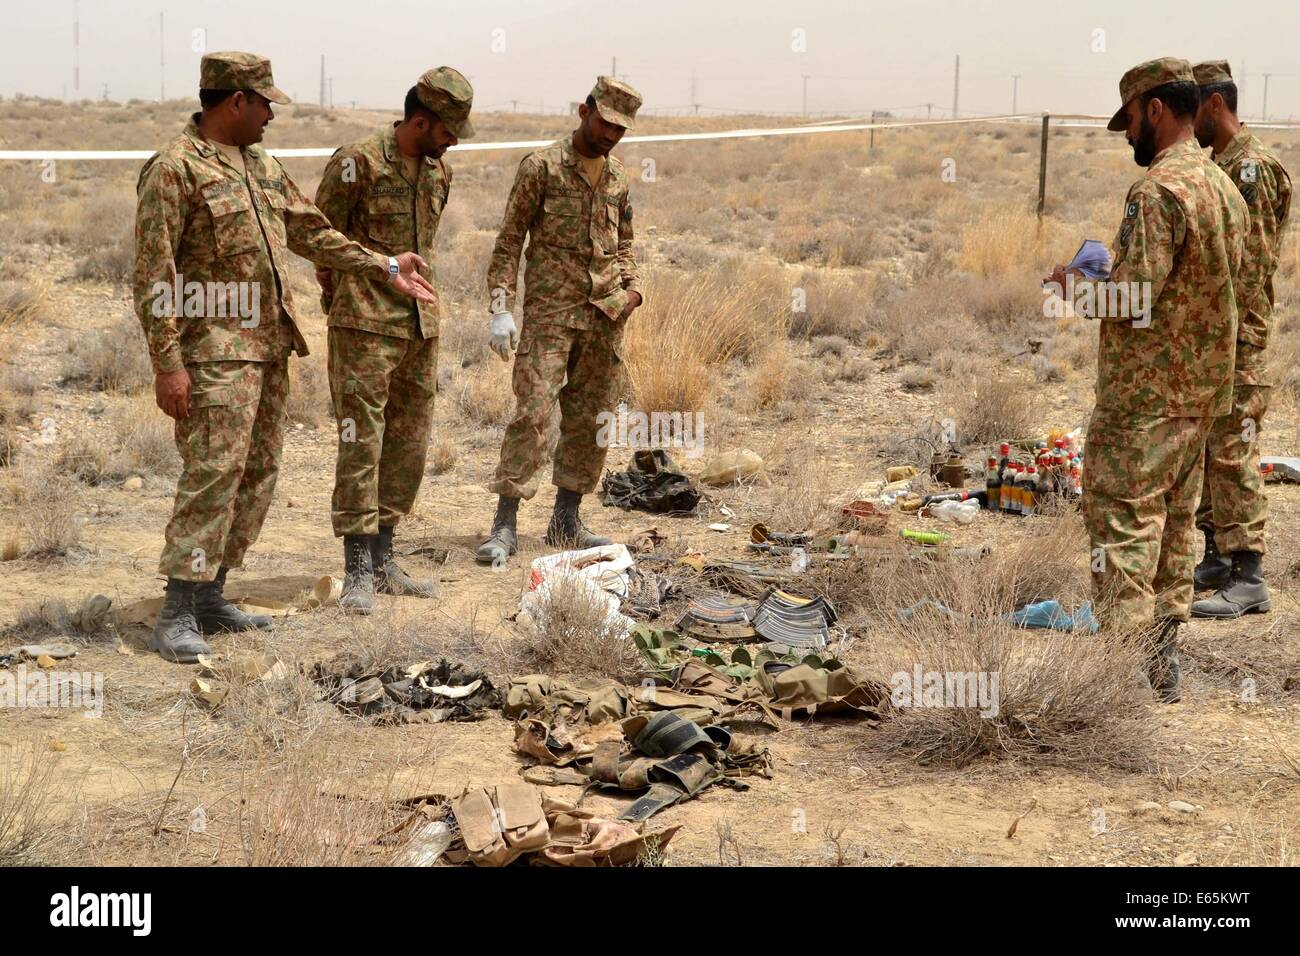 Quetta. 15th Aug, 2014. Pakistani security officials display ammunition that were recovered from militants following an attack on military airbases in southwest Pakistan's Quetta on Aug. 15, 2014. At least six terrorists were killed and 11 security personnel injured on Thursday night in a terrorist attack at an airbase of Pakistan Air Force near Quetta, officials said. Credit:  Asad/Xinhua/Alamy Live News Stock Photo